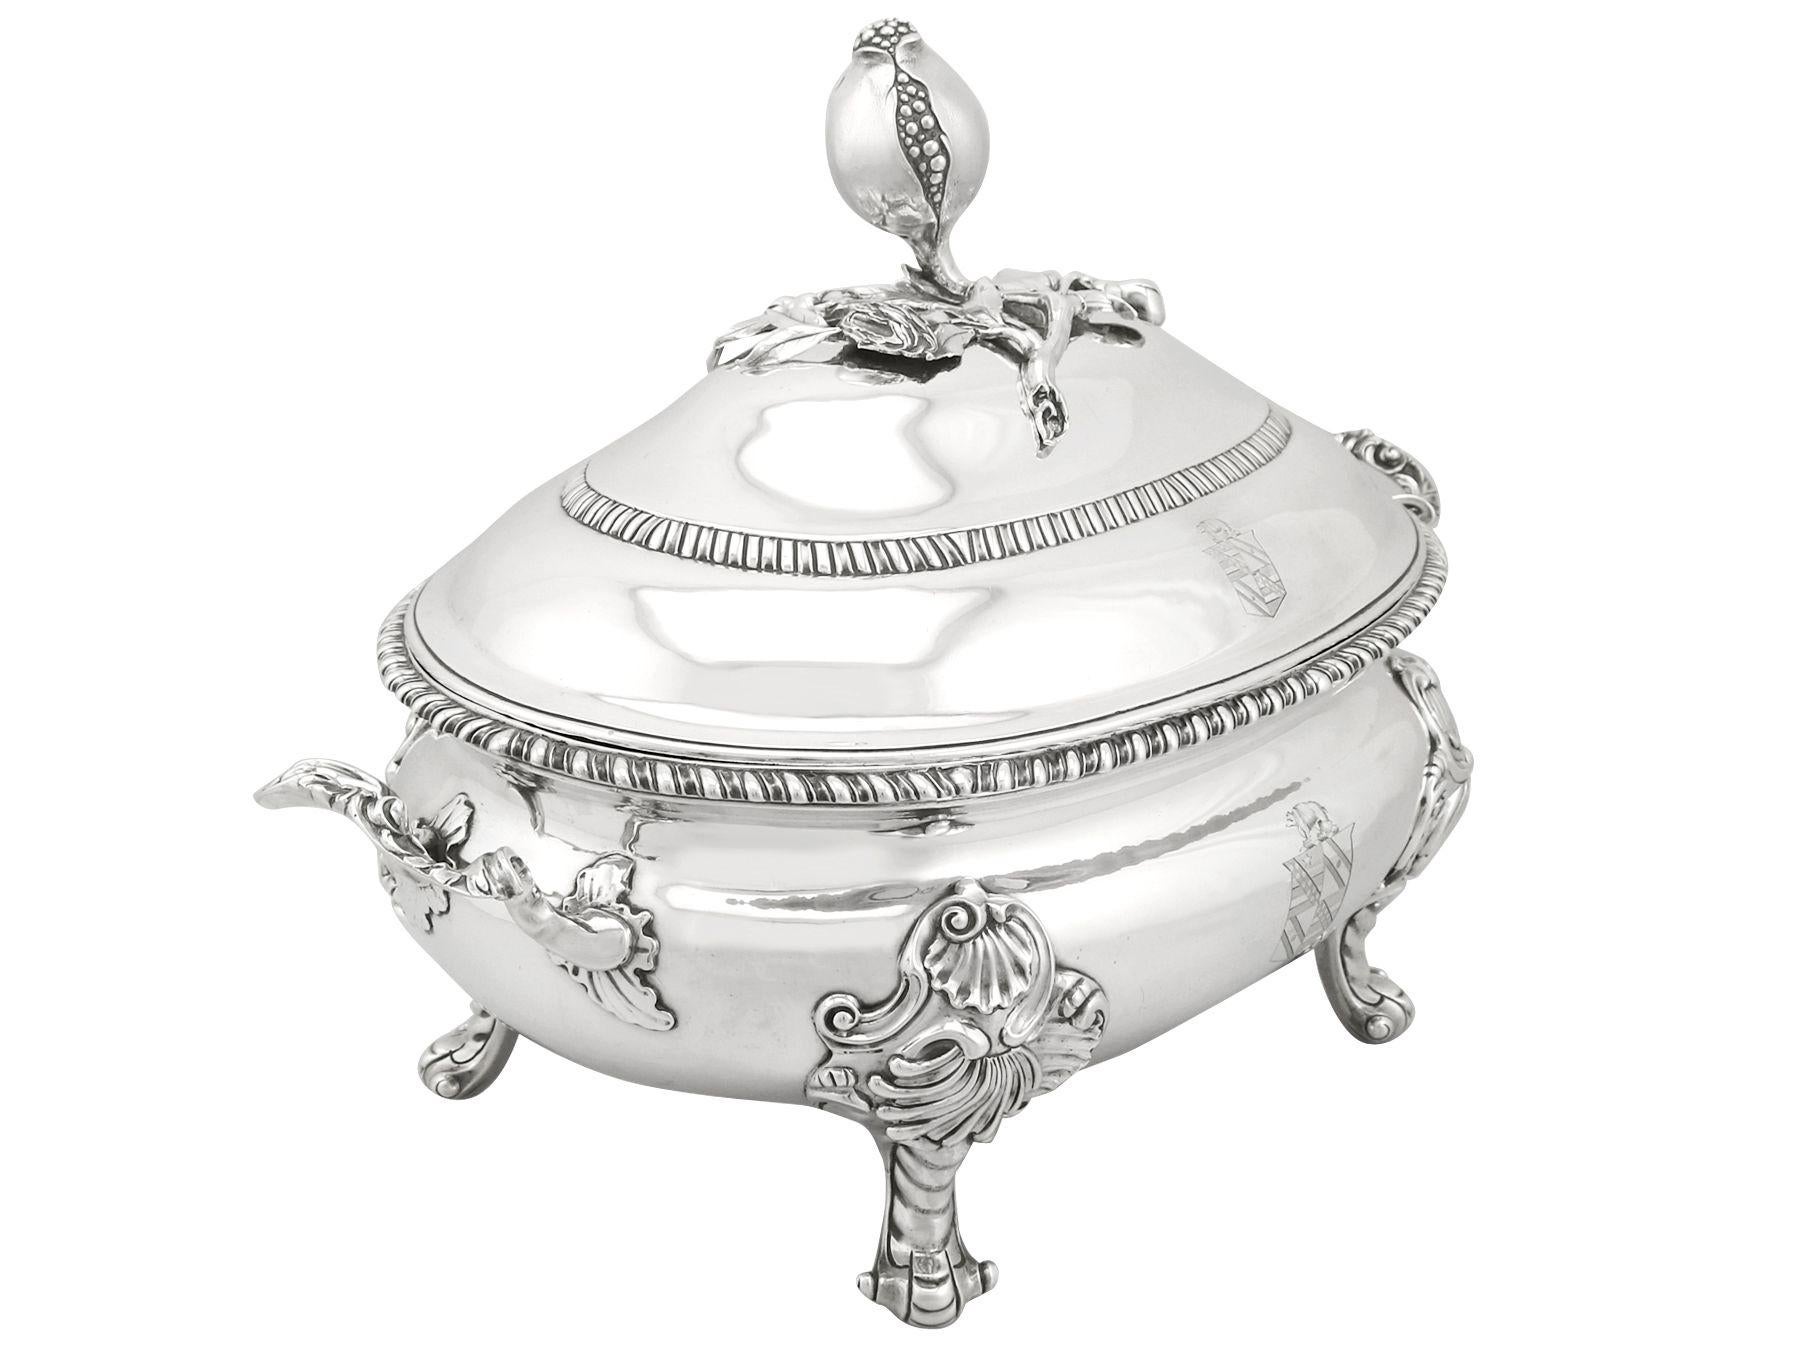 A magnificent, fine and impressive antique Georgian English sterling silver soup tureen; an addition to our collection of serving dishes.

This magnificent antique George II English sterling silver soup tureen has an oval rounded form.

The